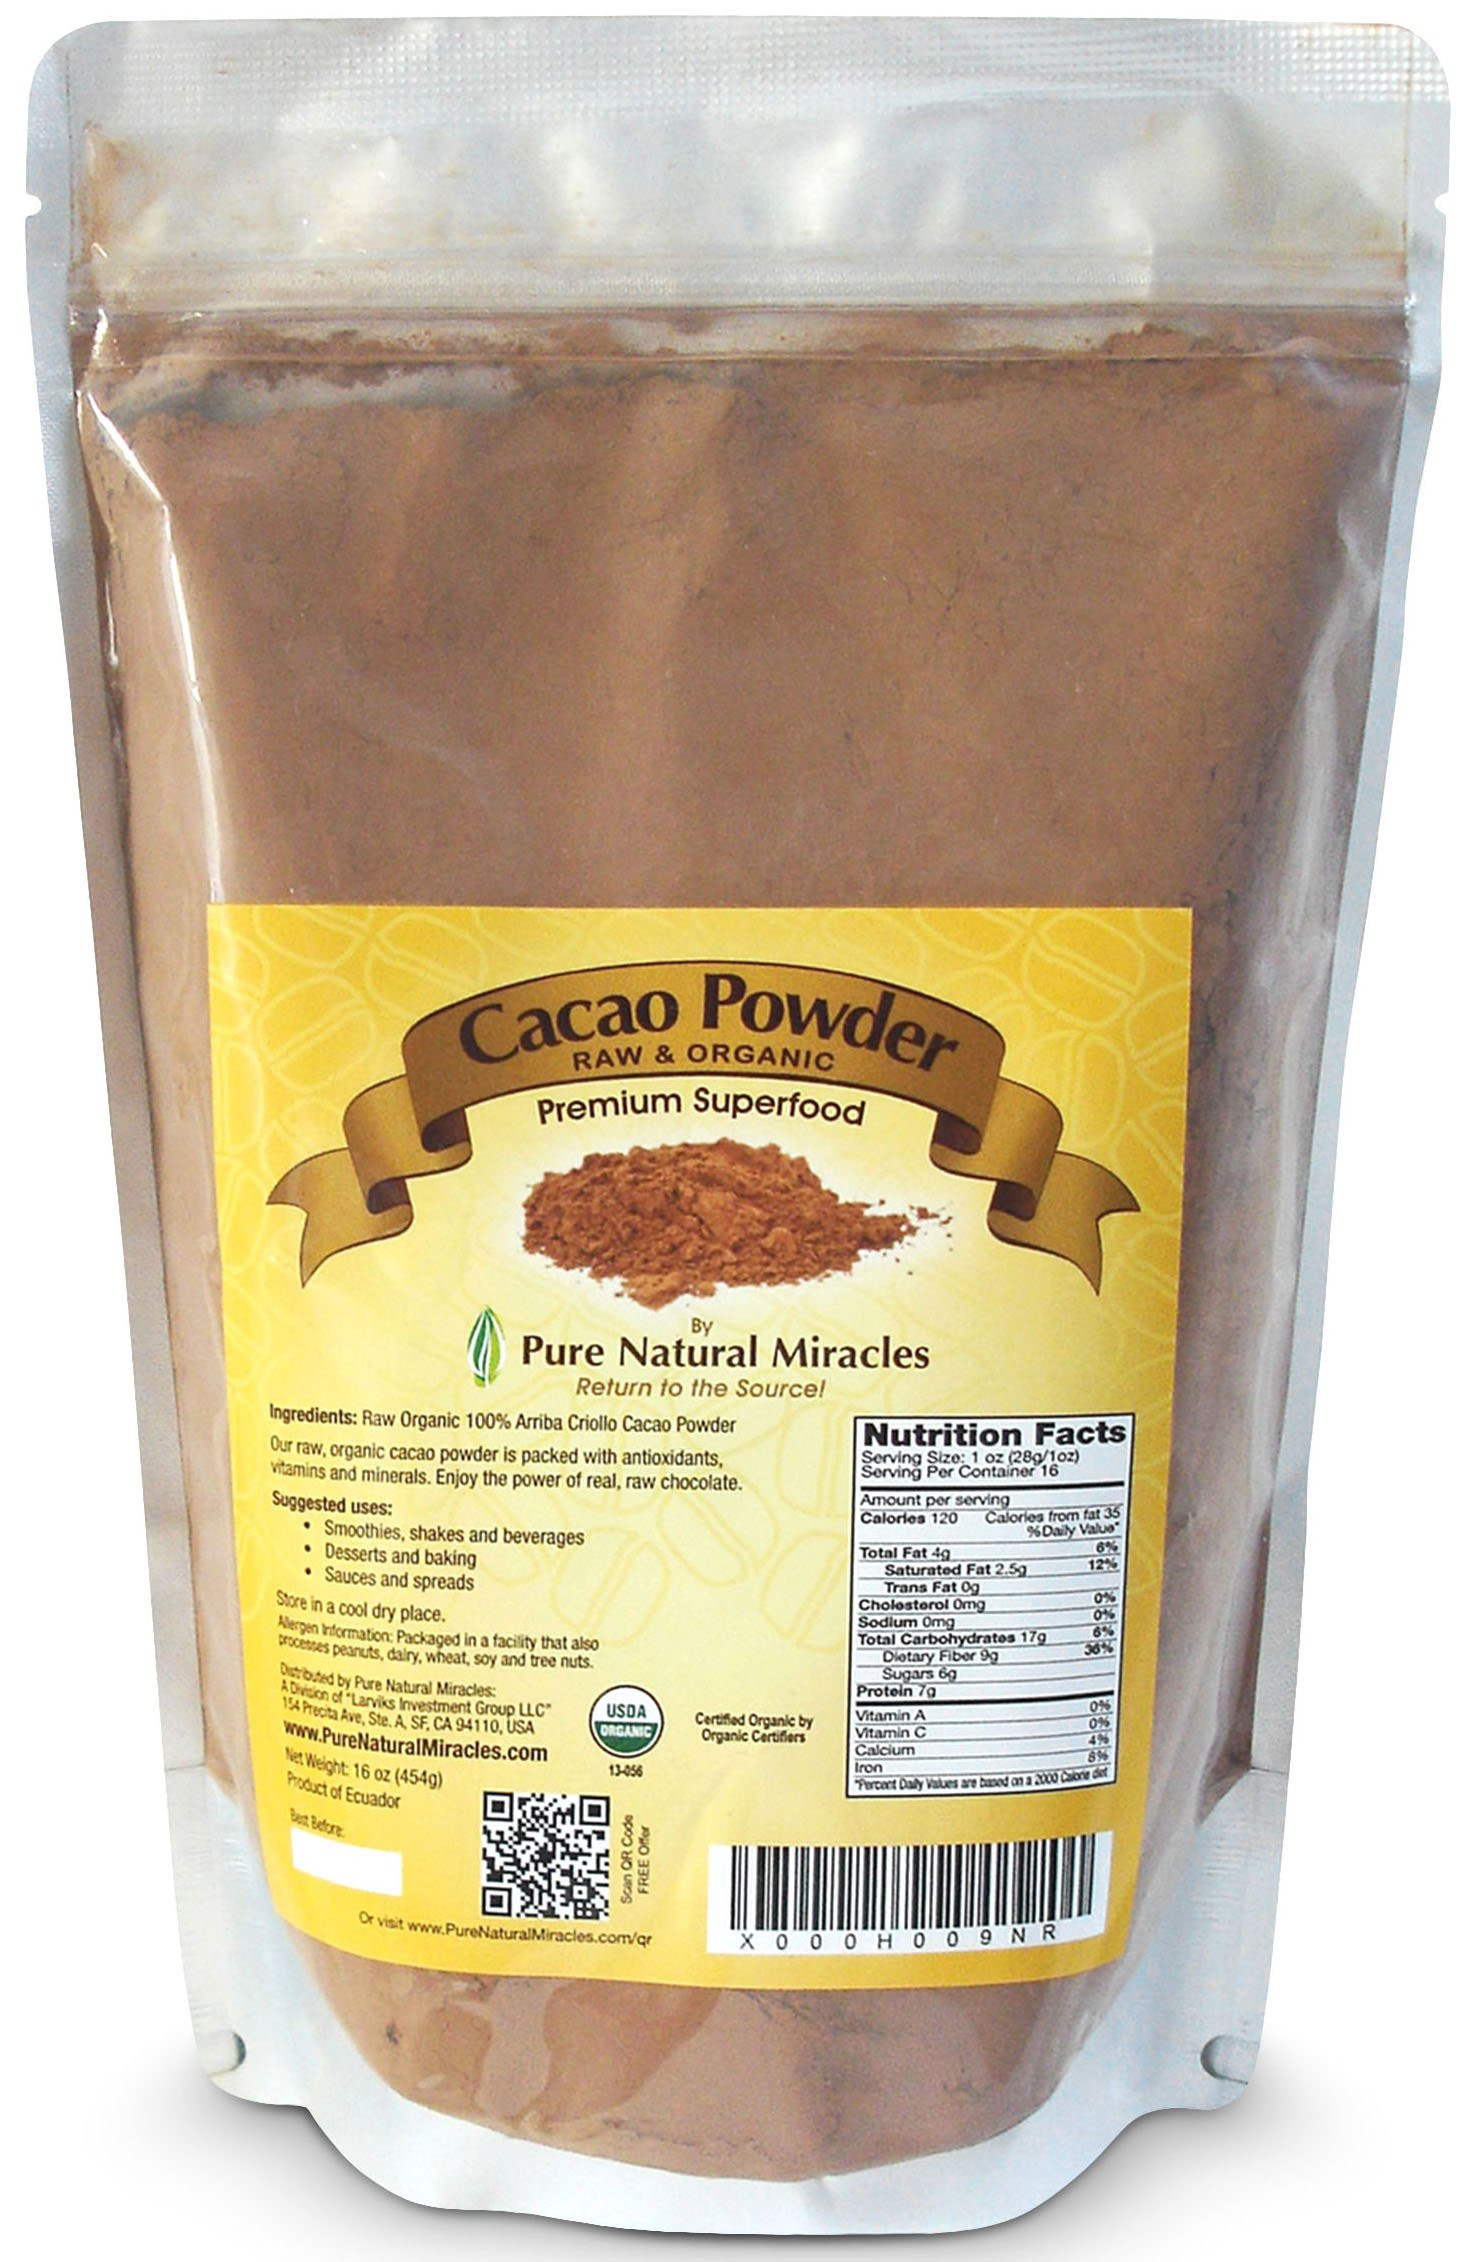 Organic Unsweetened Cocoa Powder 20 Of the Best Ideas for Pure Natural Miracles Raw organic Cacao Powder Best